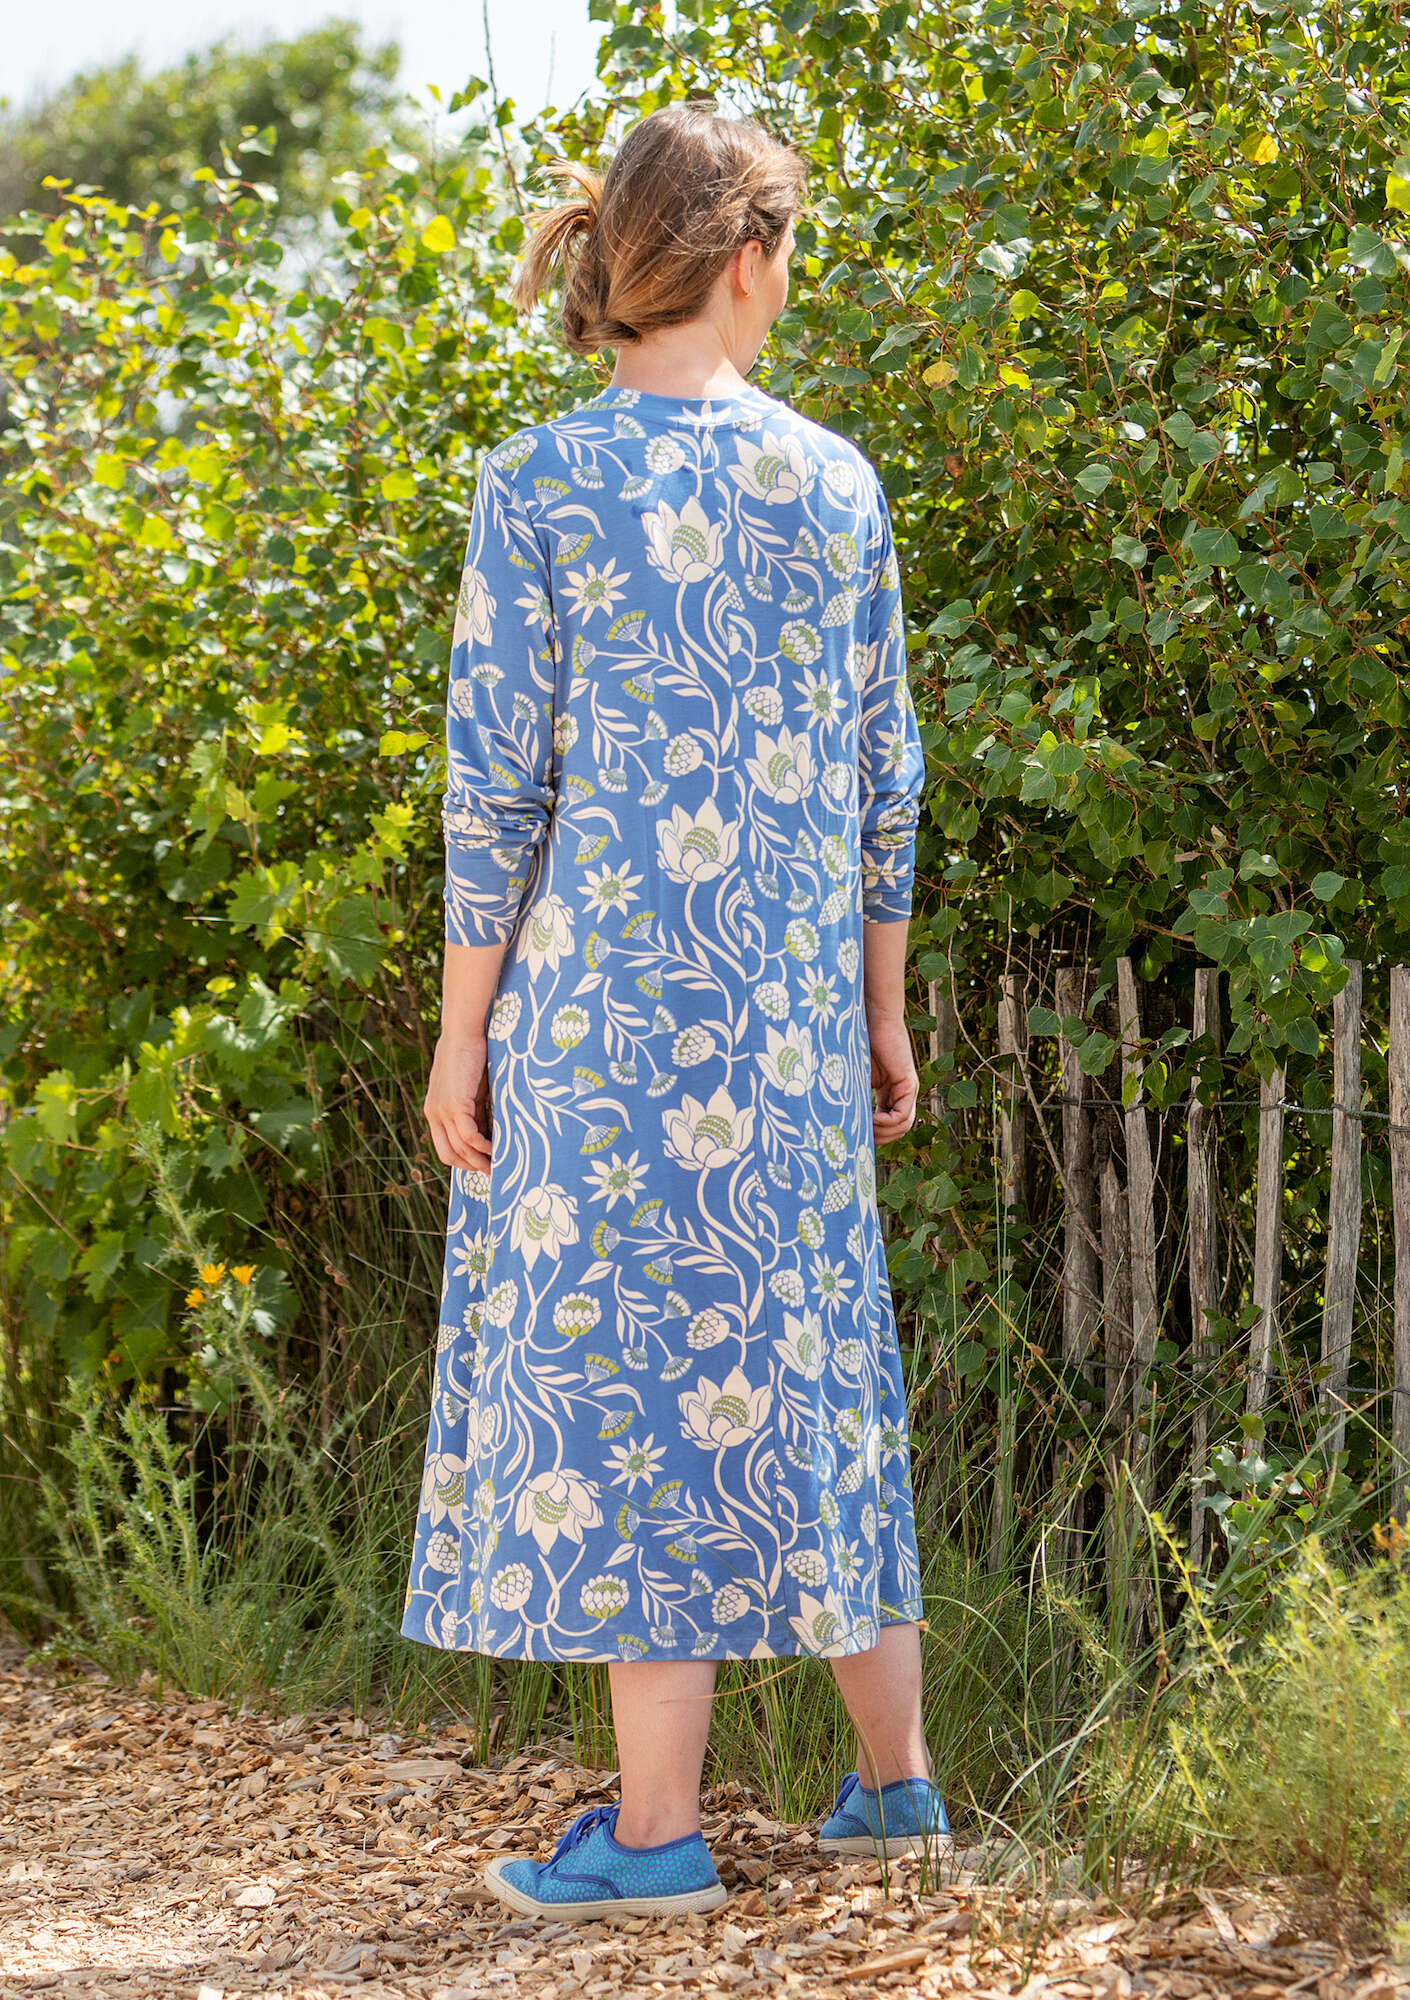 “Protea” jersey dress in lyocell/spandex flax blue